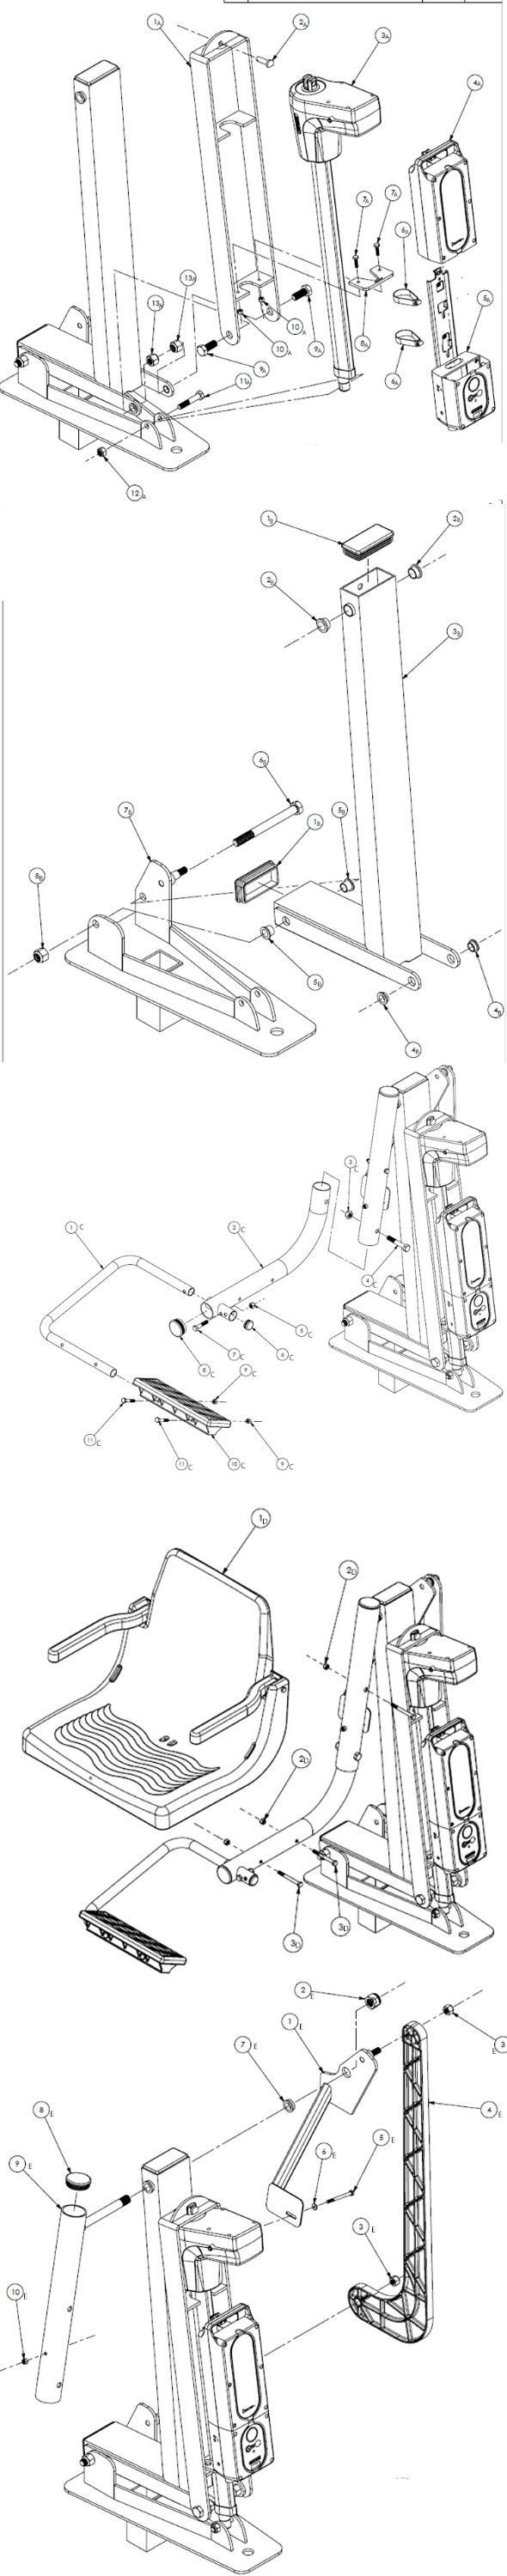 Global Pool Products Superior Series S-350 Pool Lift with Concrete Anchor | S350SA Parts Schematic